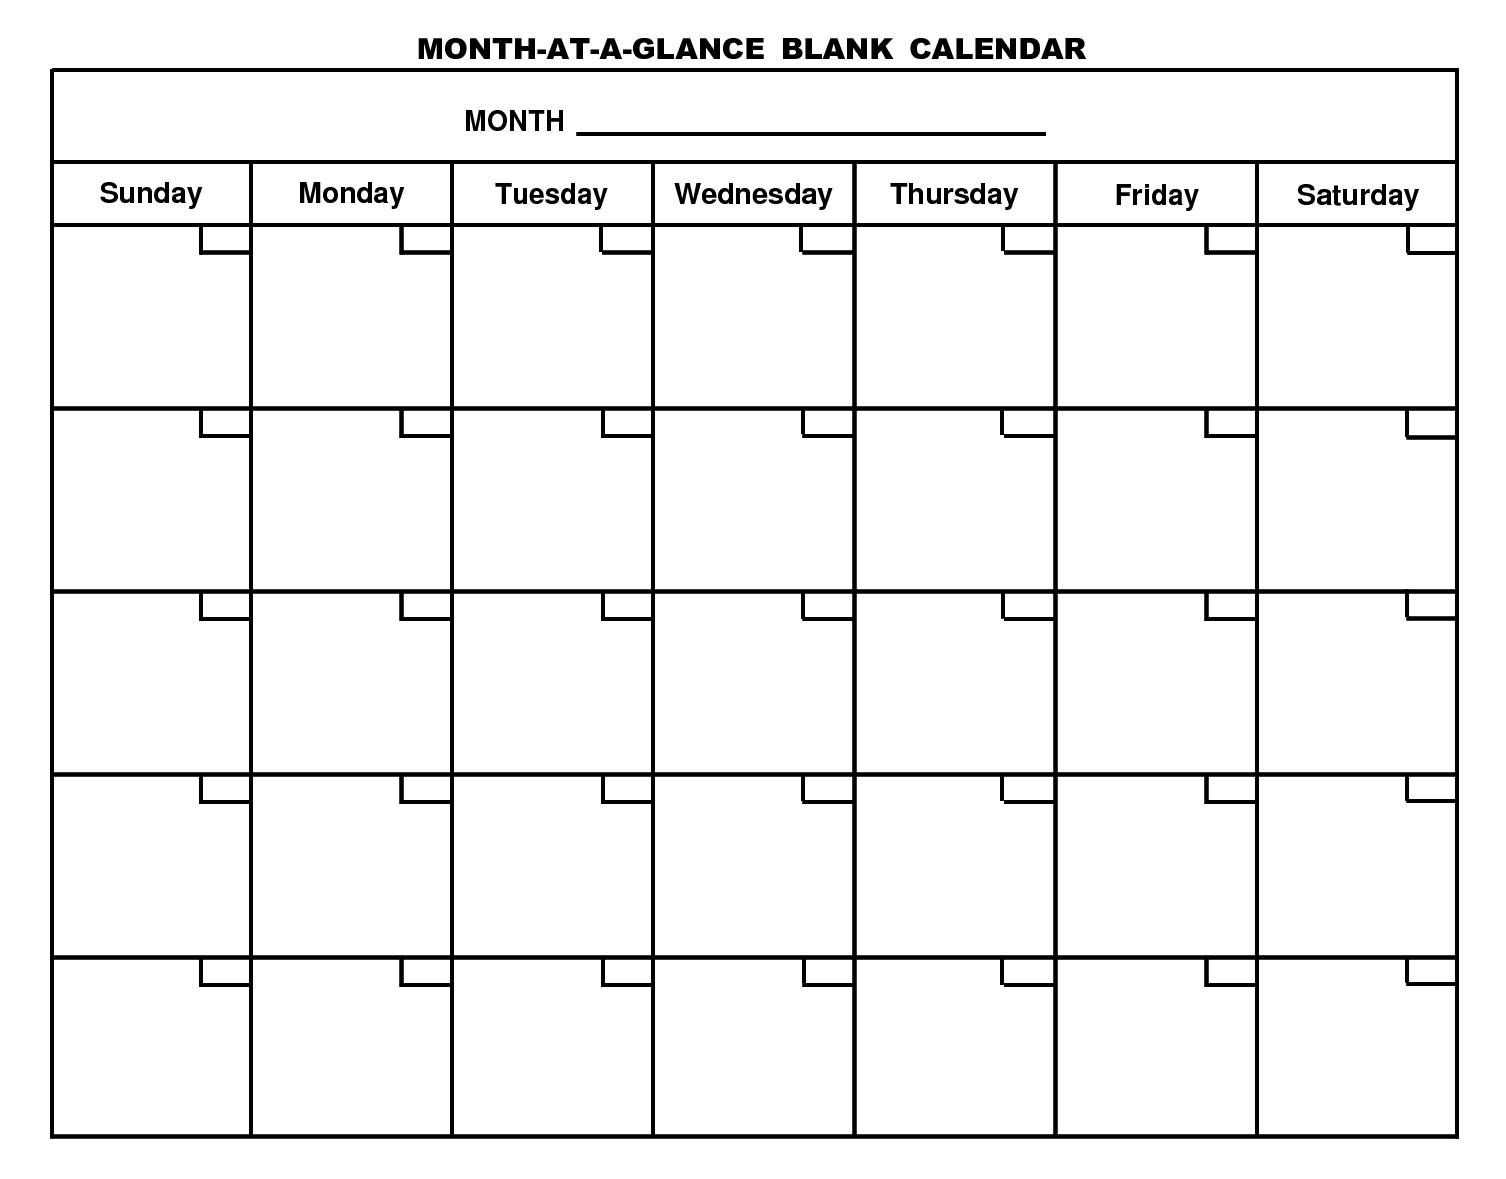 Month At A Glance Blank Calendar | Monthly Printable Calender Throughout Month At A Glance Blank Calendar Template